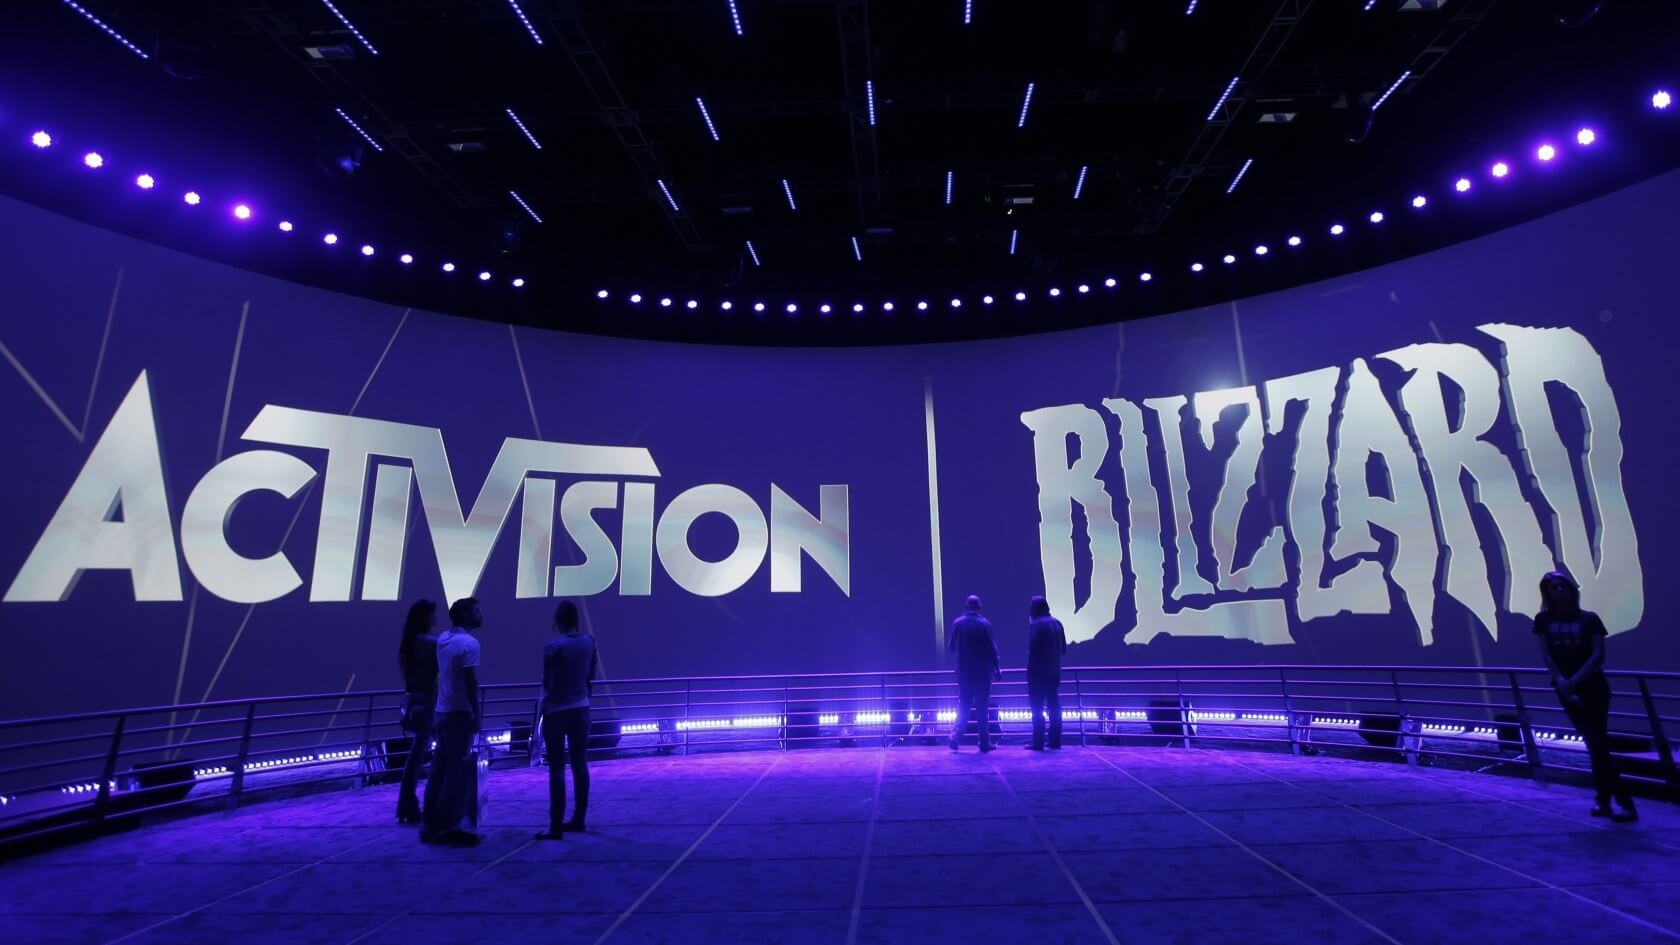 Activision Blizzard's games were pulled from GeForce Now due to a misunderstanding, Nvidia says